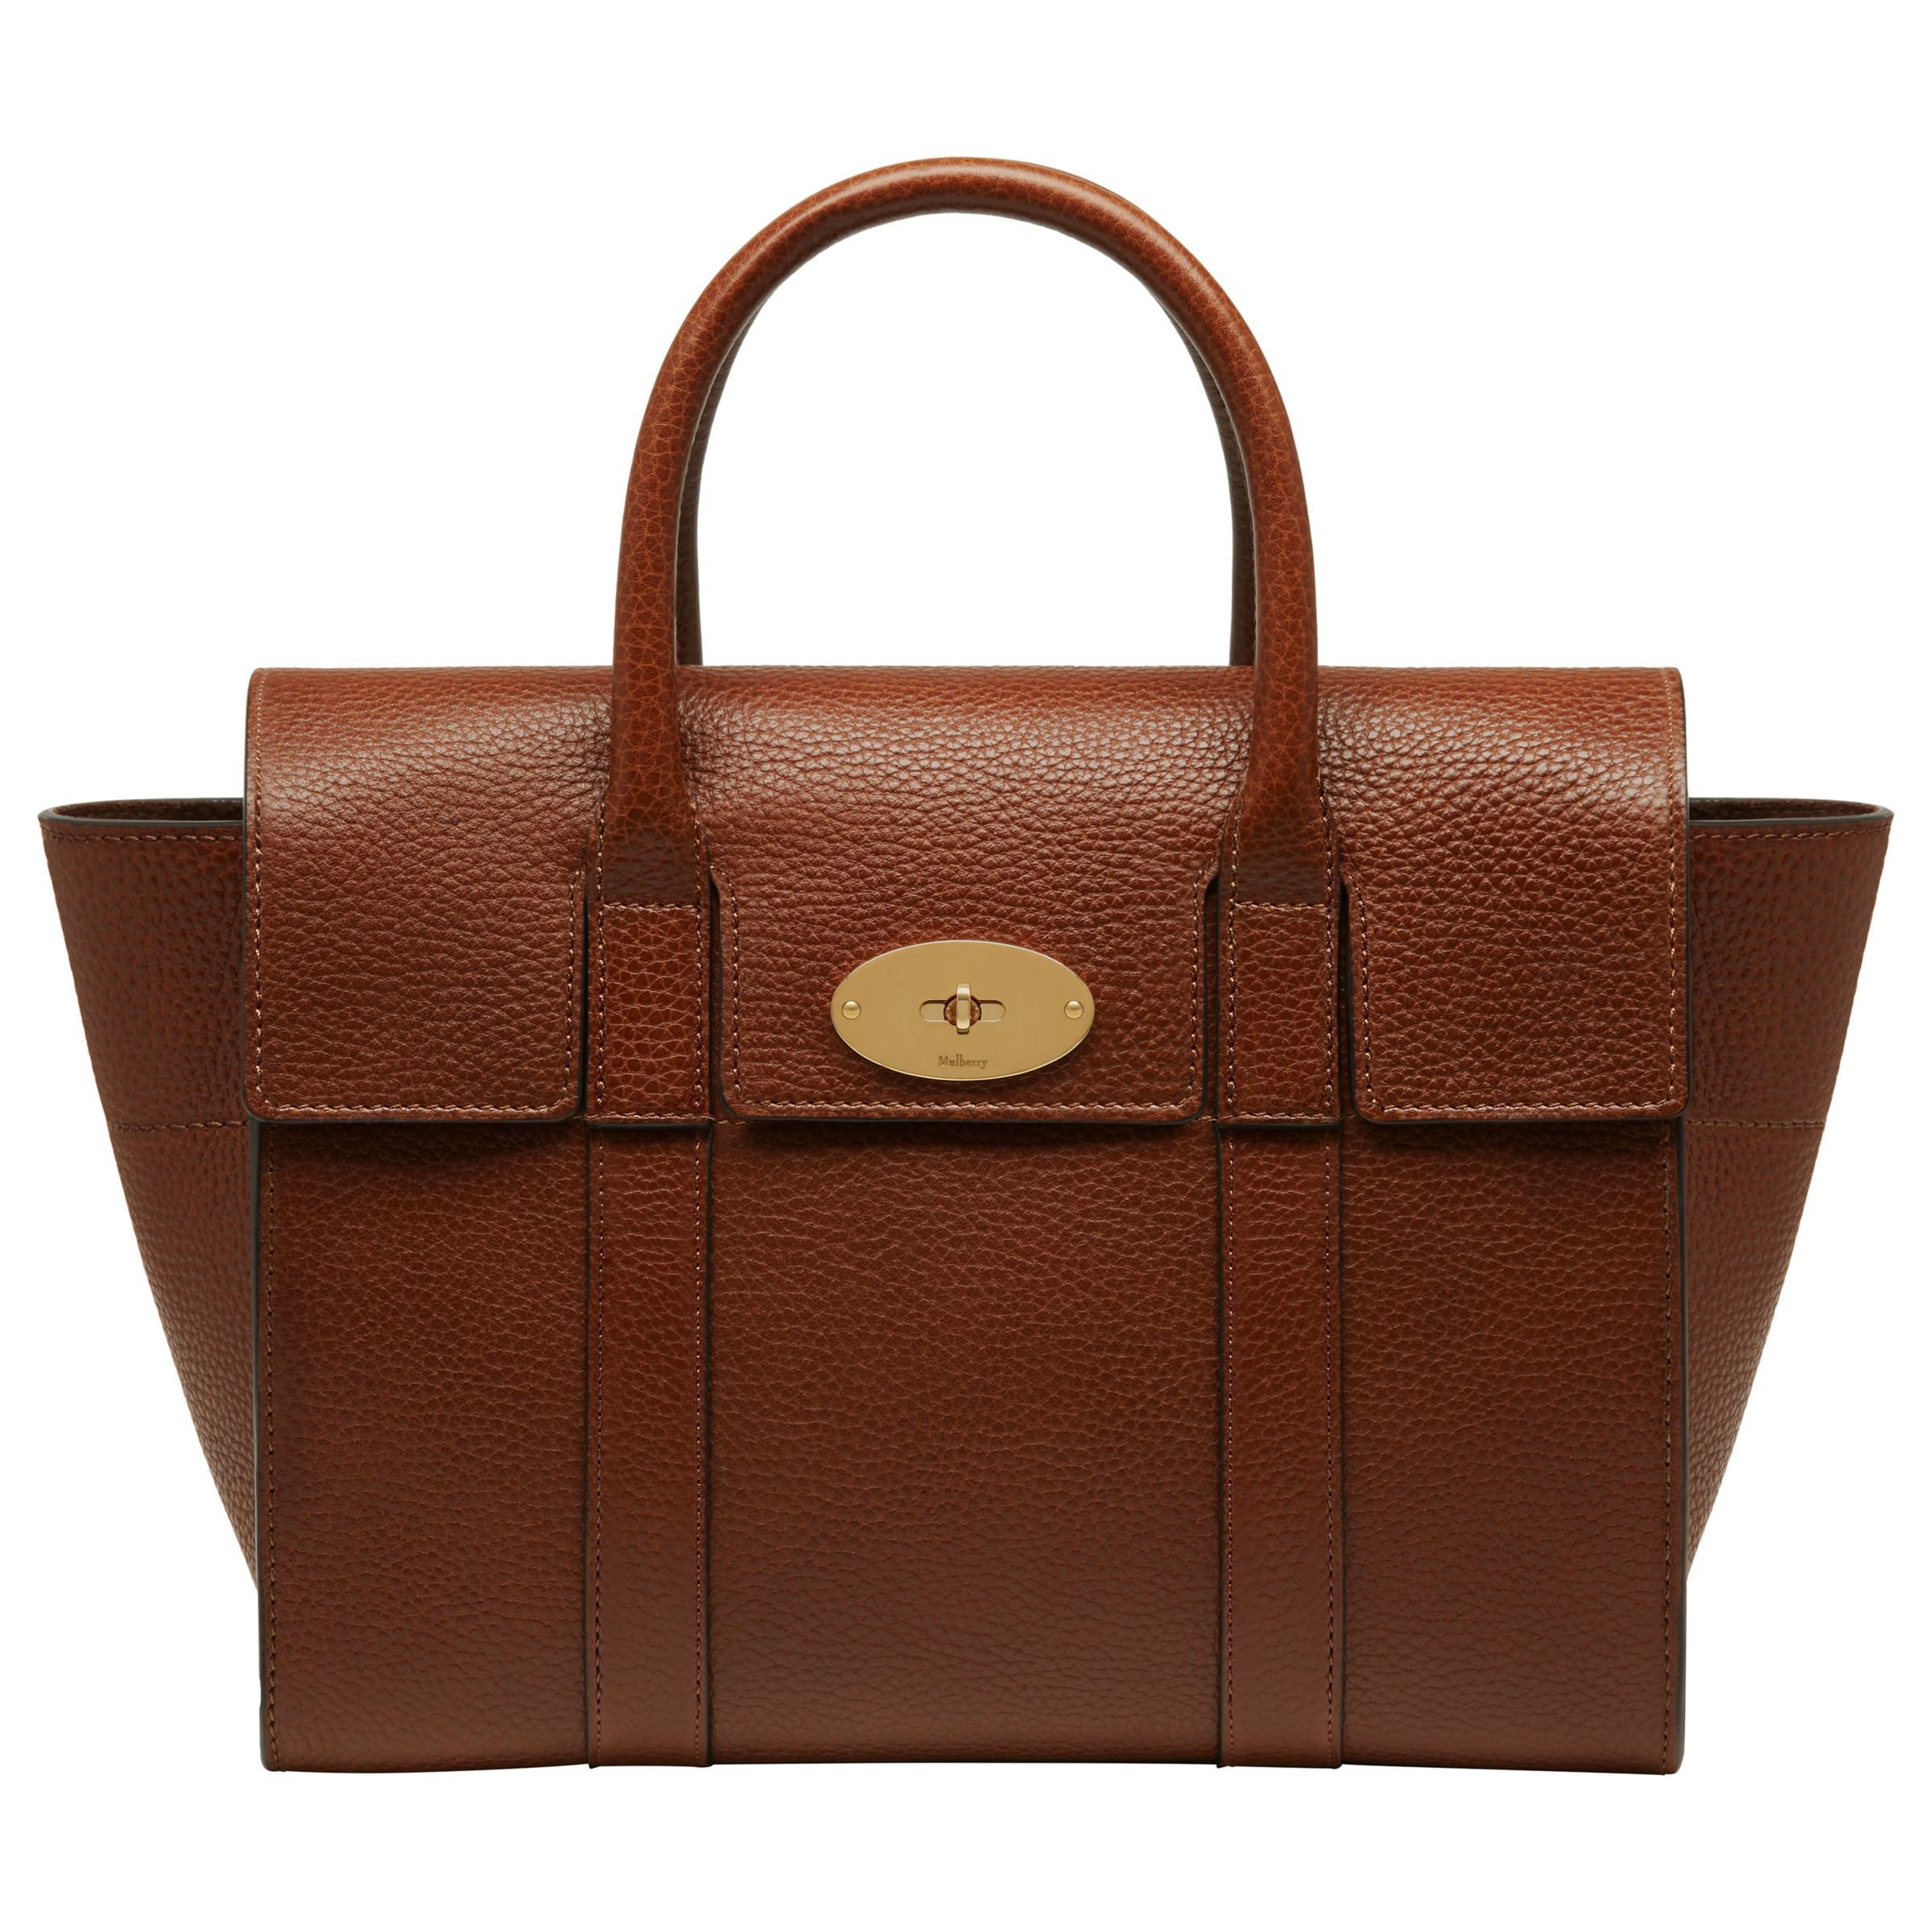 Brown bag. (Mulberry-Brown). Mulberry сумки. Mulberry сумки мужские.